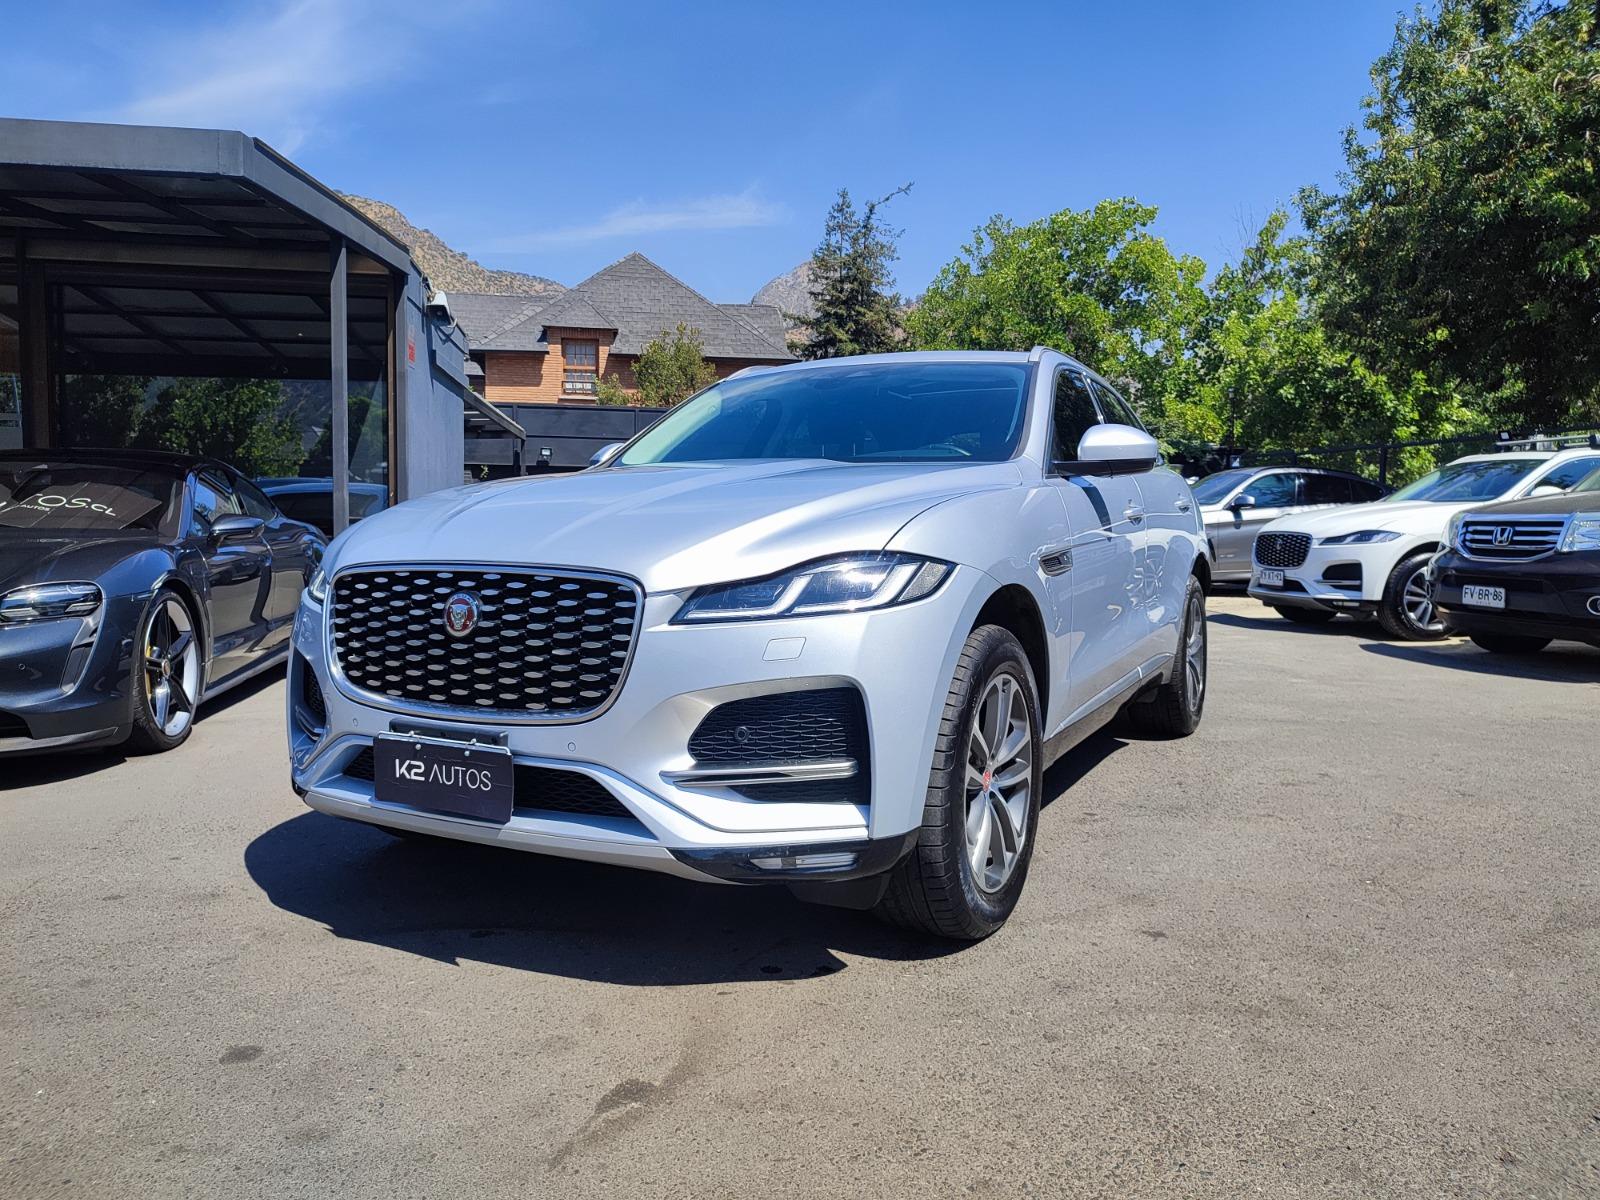 JAGUAR F-PACE 2.0ID 4X4 PRESTIGE 2022 FULL EQUIPO, IMPECABLE - 